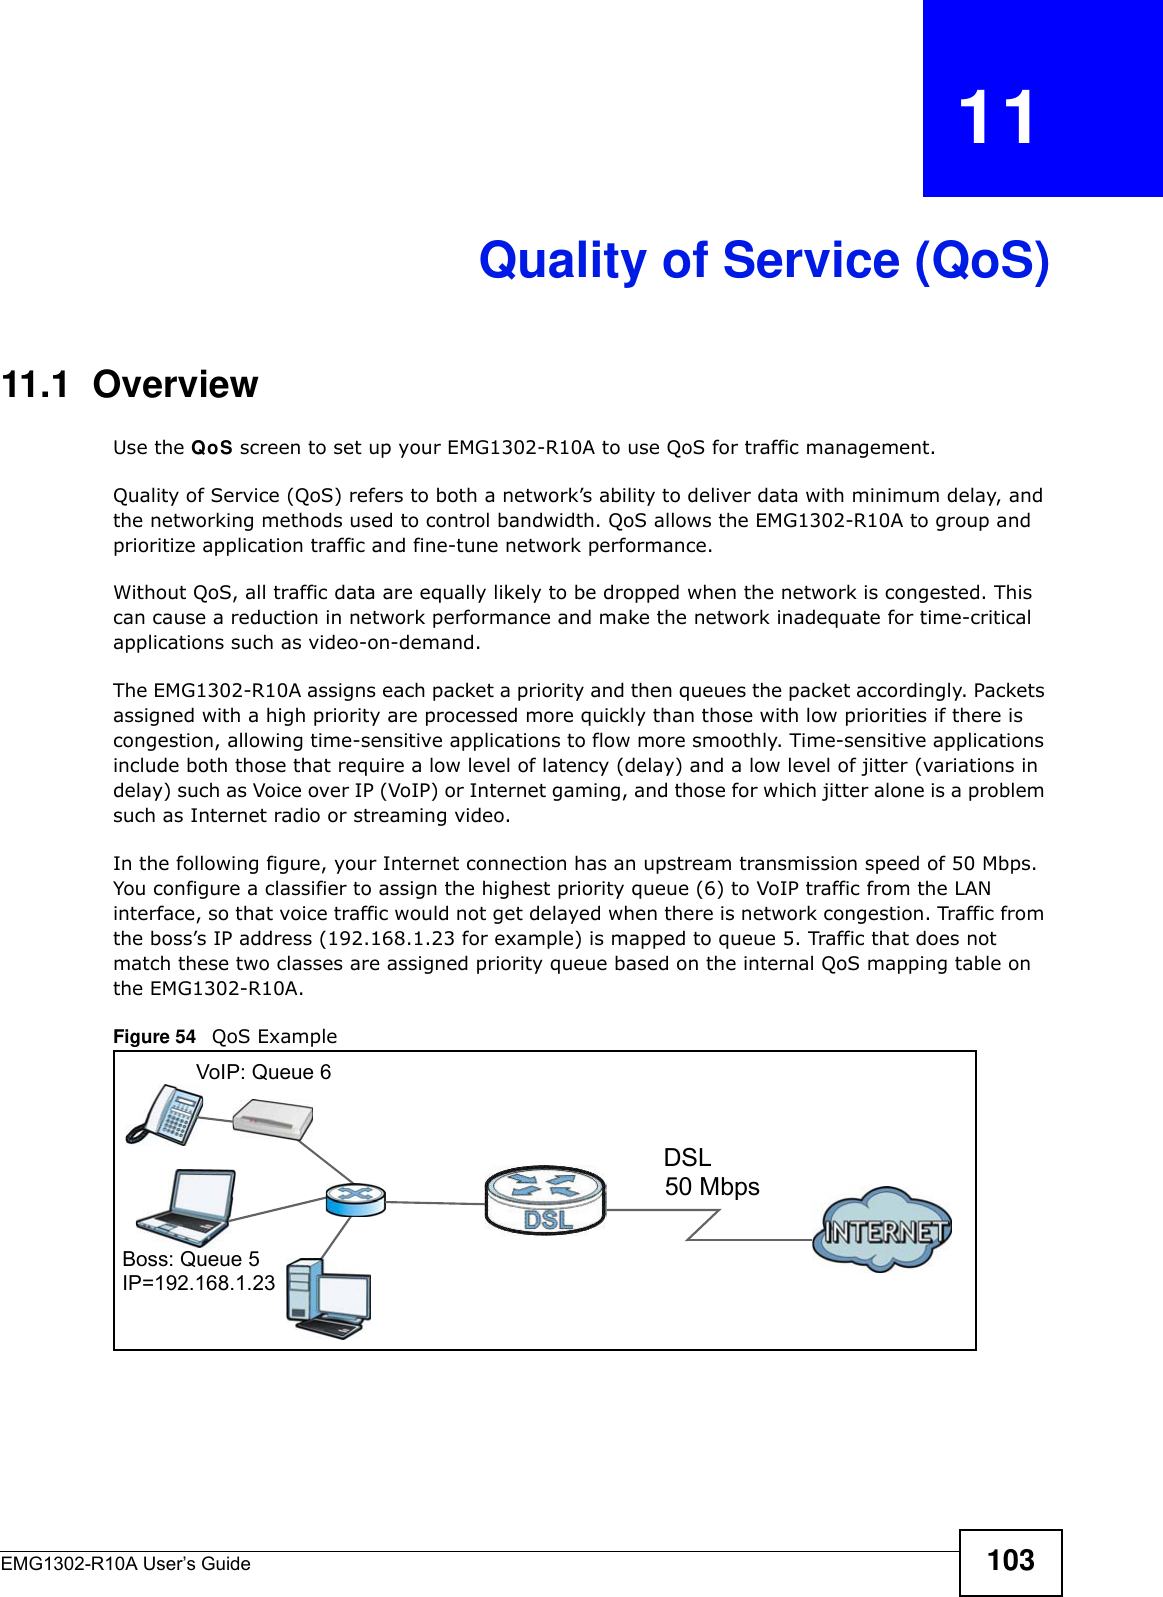 EMG1302-R10A User’s Guide 103CHAPTER   11Quality of Service (QoS)11.1  OverviewUse the QoS screen to set up your EMG1302-R10A to use QoS for traffic management. Quality of Service (QoS) refers to both a network’s ability to deliver data with minimum delay, and the networking methods used to control bandwidth. QoS allows the EMG1302-R10A to group and prioritize application traffic and fine-tune network performance. Without QoS, all traffic data are equally likely to be dropped when the network is congested. This can cause a reduction in network performance and make the network inadequate for time-critical applications such as video-on-demand.The EMG1302-R10A assigns each packet a priority and then queues the packet accordingly. Packets assigned with a high priority are processed more quickly than those with low priorities if there is congestion, allowing time-sensitive applications to flow more smoothly. Time-sensitive applications include both those that require a low level of latency (delay) and a low level of jitter (variations in delay) such as Voice over IP (VoIP) or Internet gaming, and those for which jitter alone is a problem such as Internet radio or streaming video.In the following figure, your Internet connection has an upstream transmission speed of 50 Mbps. You configure a classifier to assign the highest priority queue (6) to VoIP traffic from the LAN interface, so that voice traffic would not get delayed when there is network congestion. Traffic from the boss’s IP address (192.168.1.23 for example) is mapped to queue 5. Traffic that does not match these two classes are assigned priority queue based on the internal QoS mapping table on the EMG1302-R10A.Figure 54   QoS Example50 MbpsDSLVoIP: Queue 6Boss: Queue 5IP=192.168.1.23